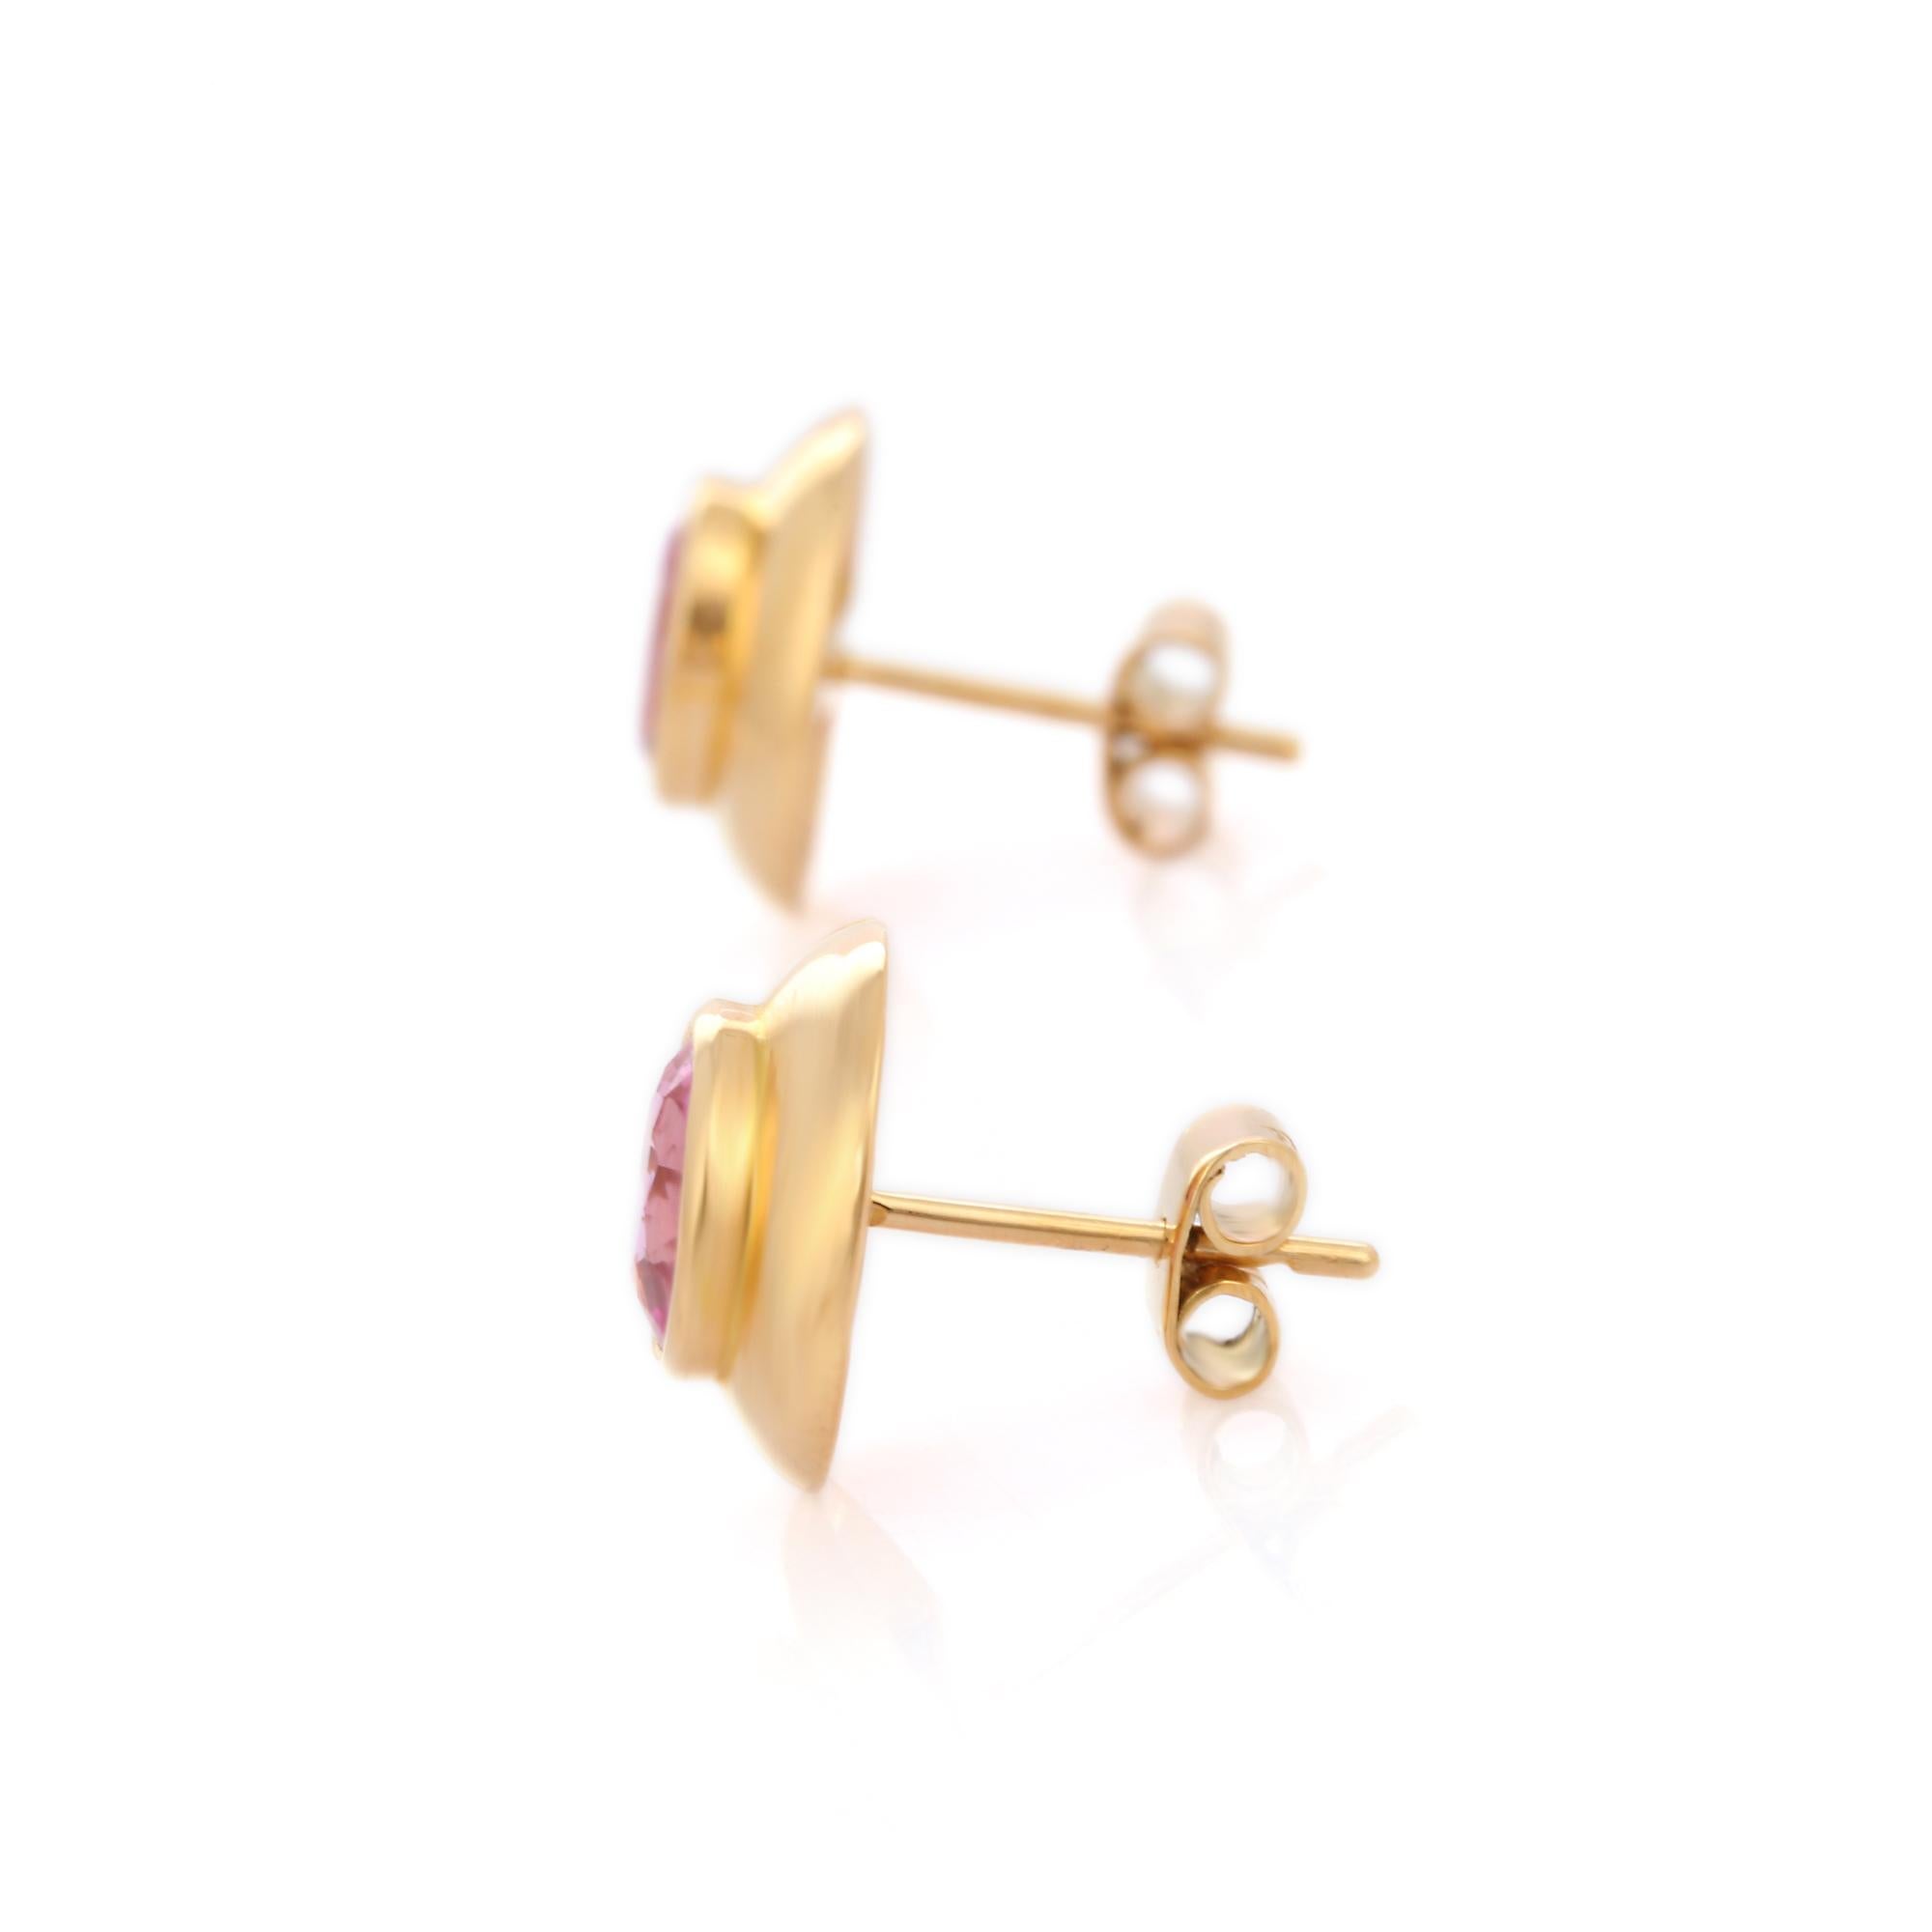 1.98 Carat Oval Cut Pink Sapphire Stud Earrings in 18K Yellow Gold In New Condition For Sale In Houston, TX